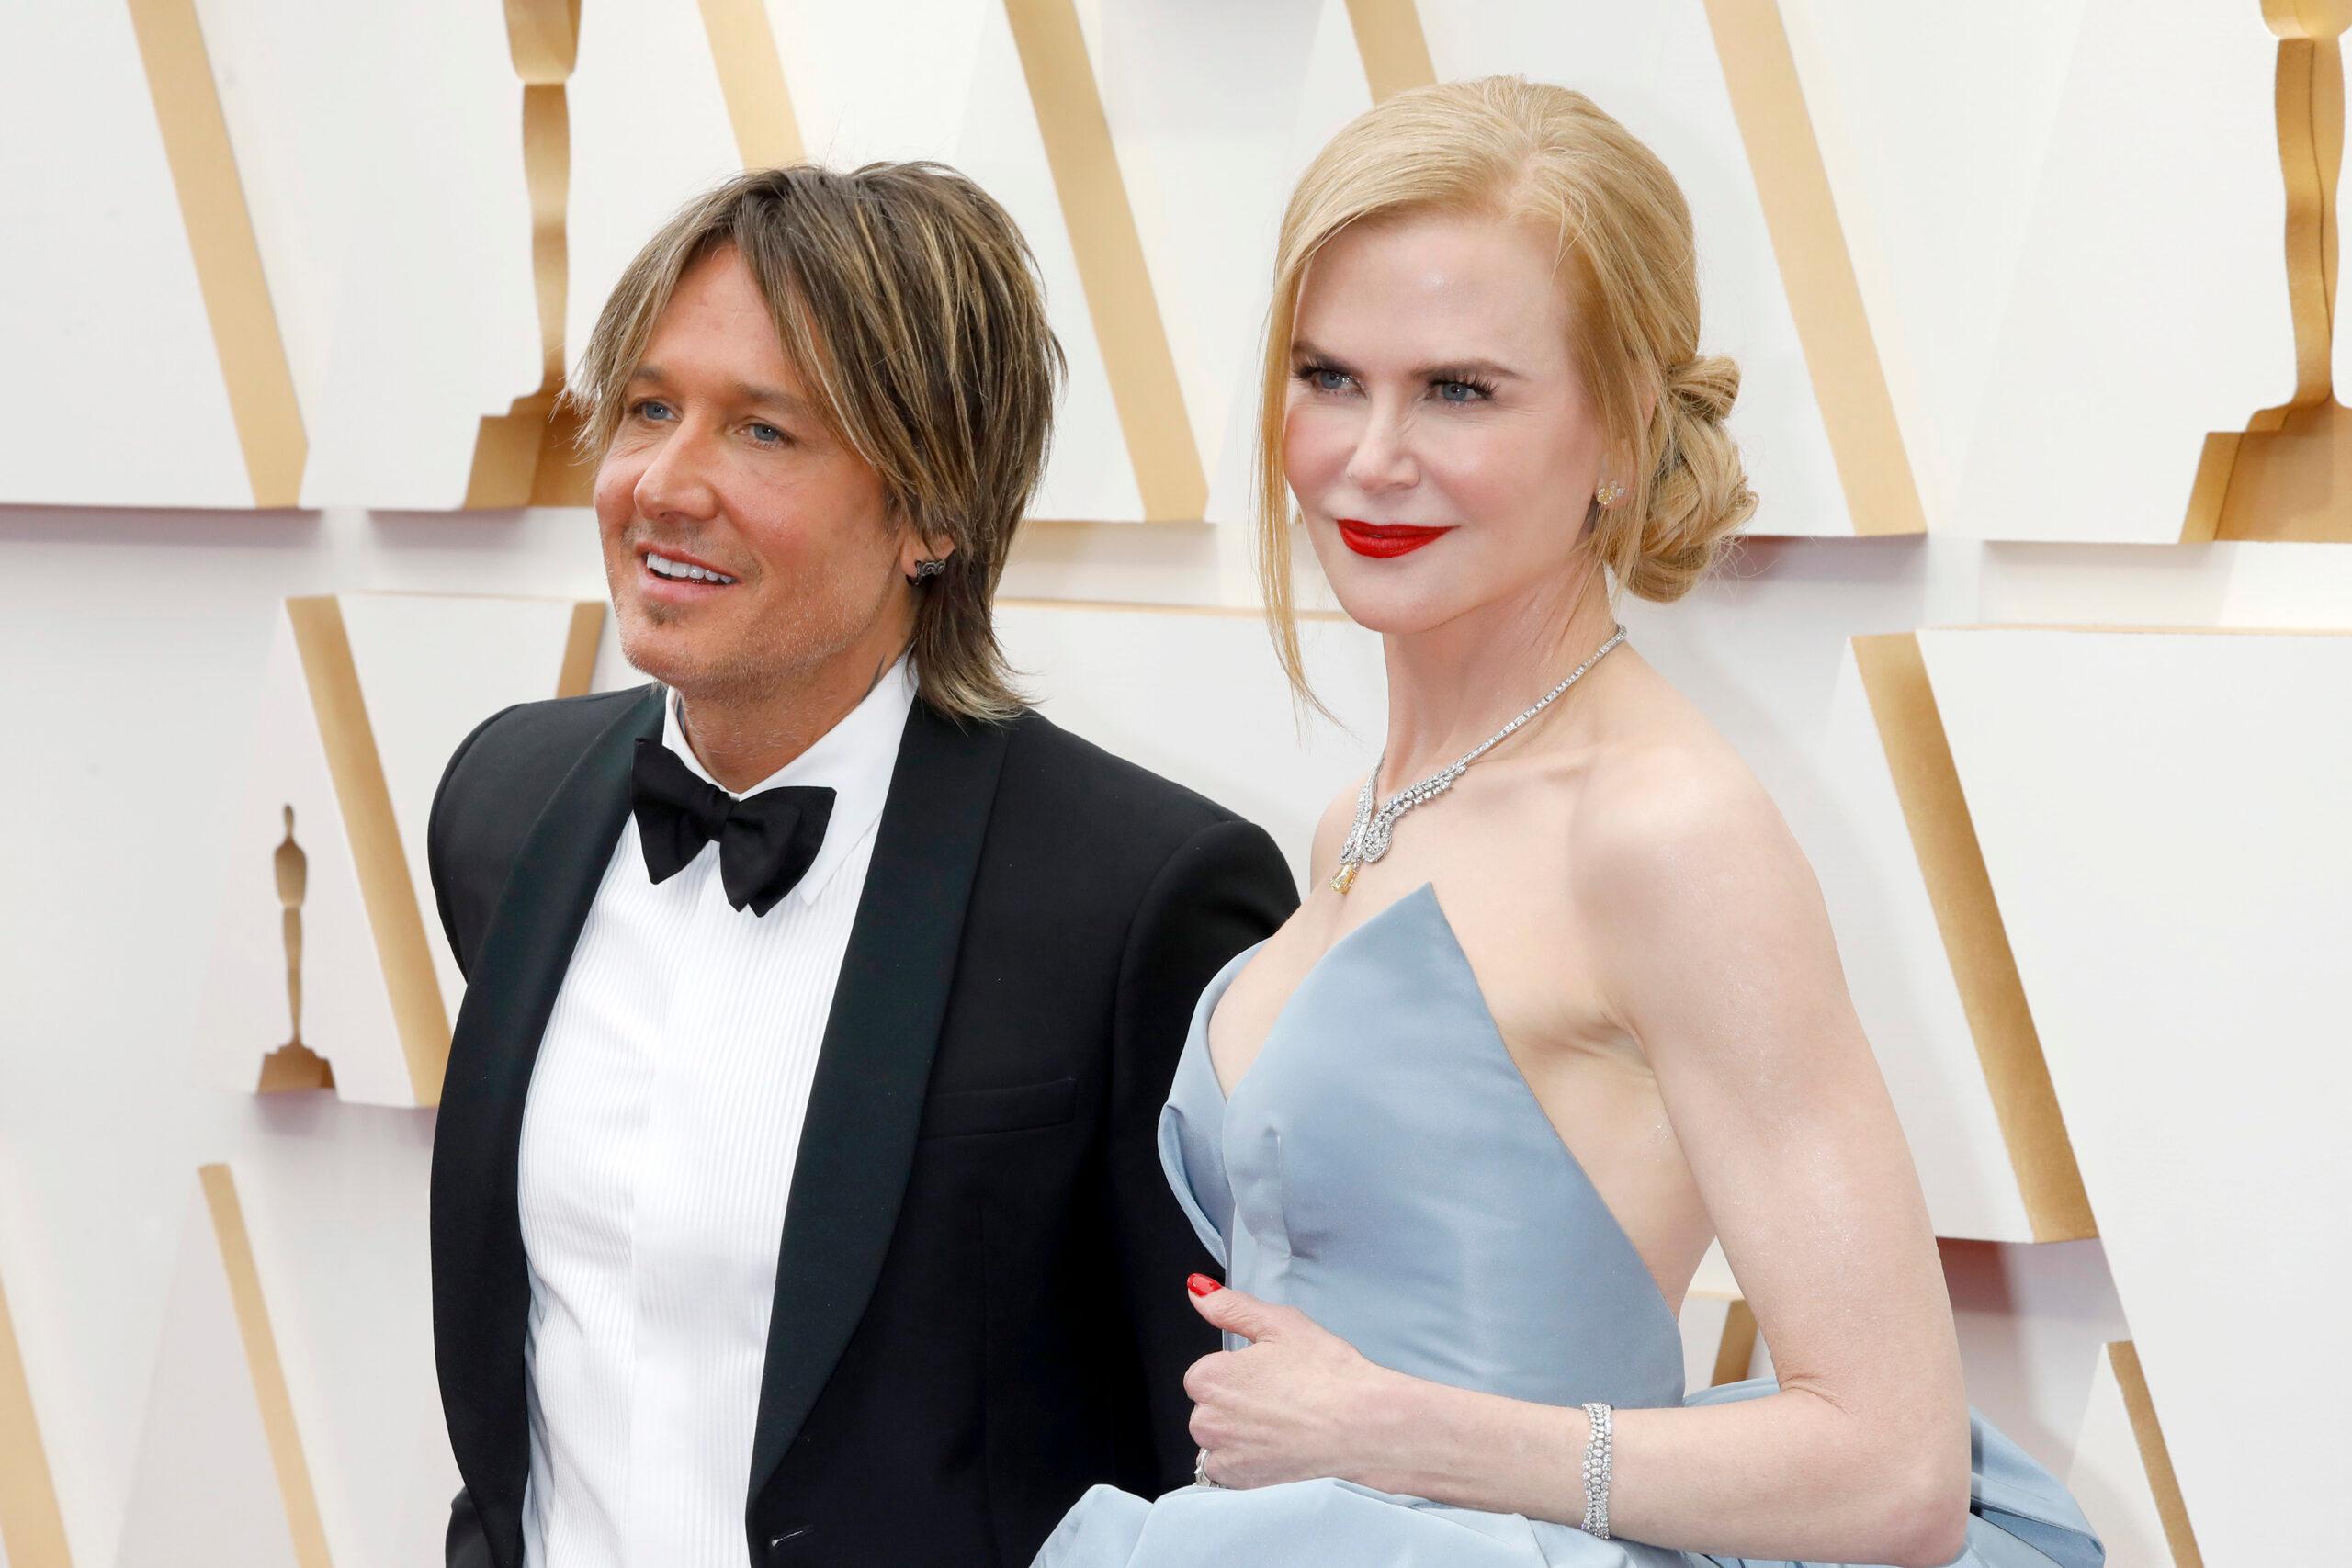 LOS ANGELES - MAR 27: Keith Urban, Nicole Kidman at the 94th Academy Awards at Dolby Theater on March 27, 2022 in Los Angeles, CA 